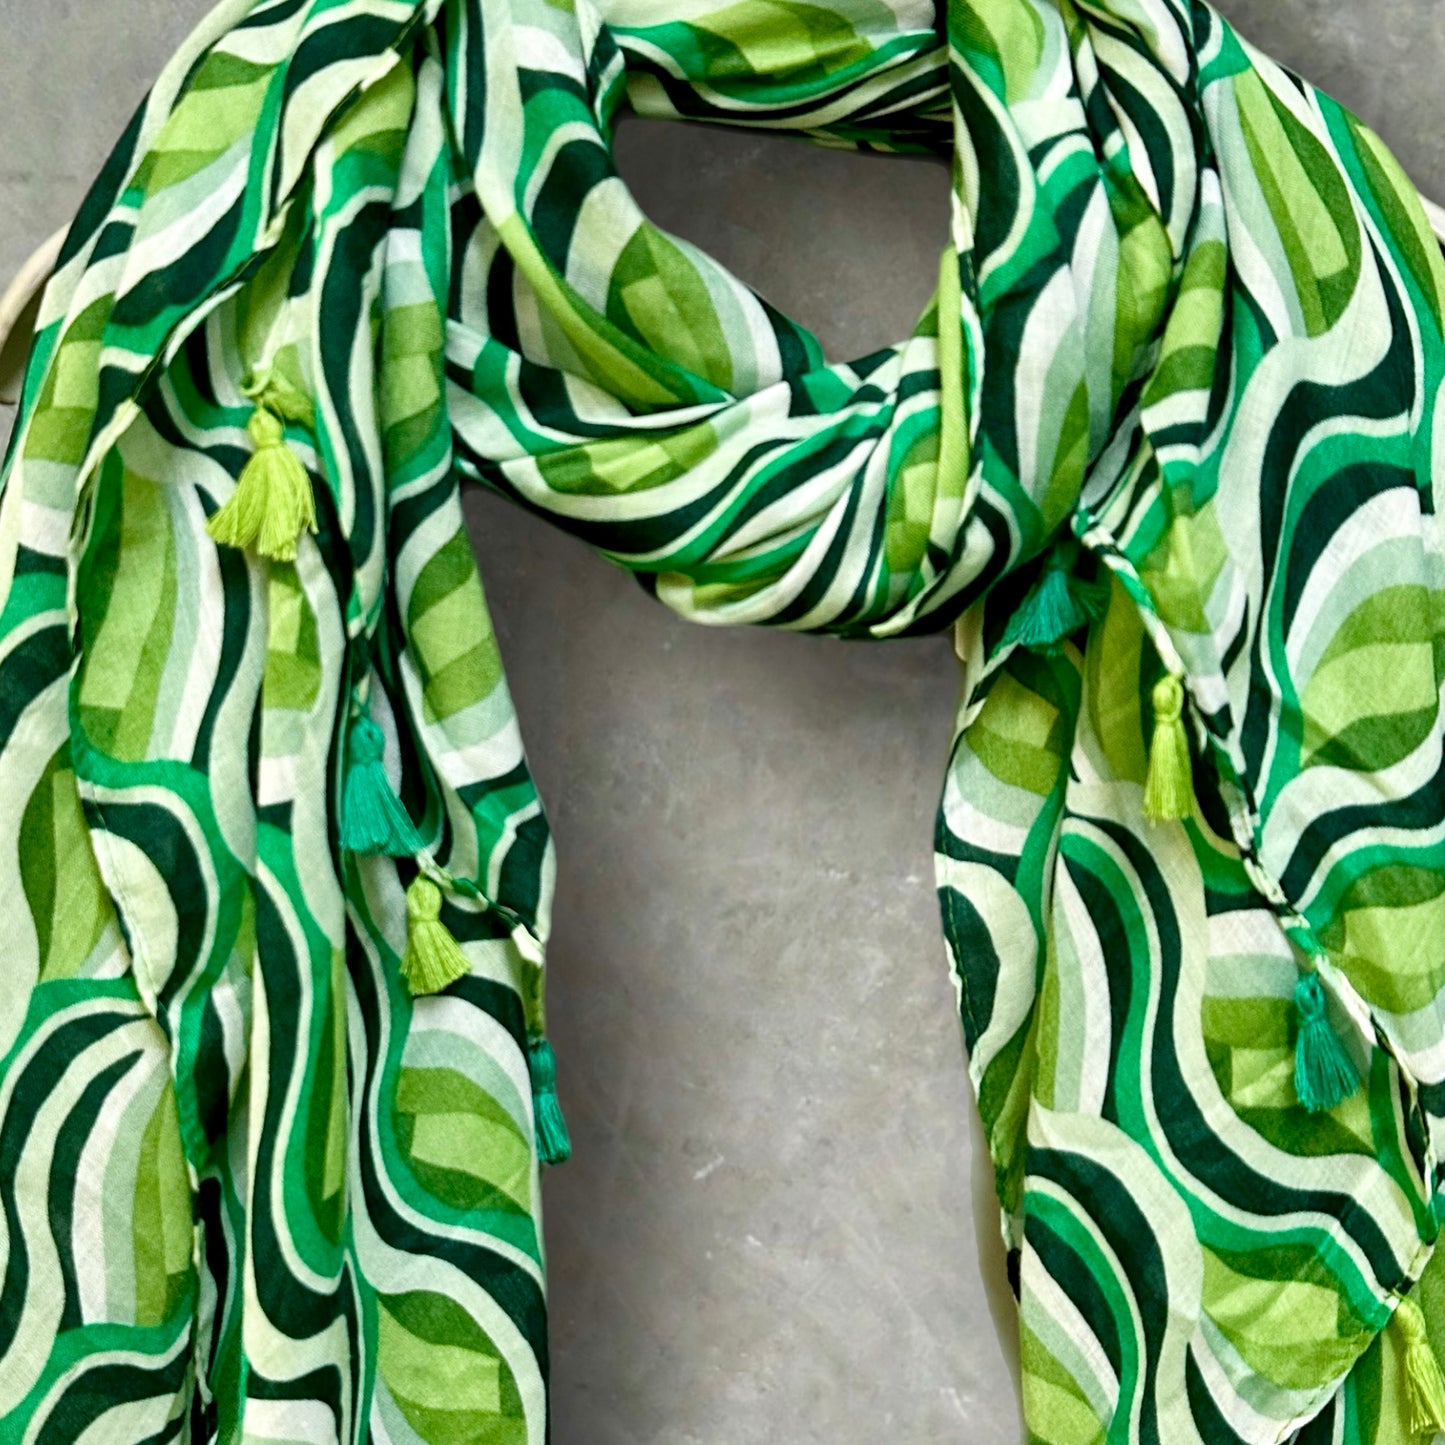 Versatile Green Scarf Featuring Wavy Stripes,Ideal Gift for Her,Perfect for Any Season,Mother's Day,Birthday or Christmas.